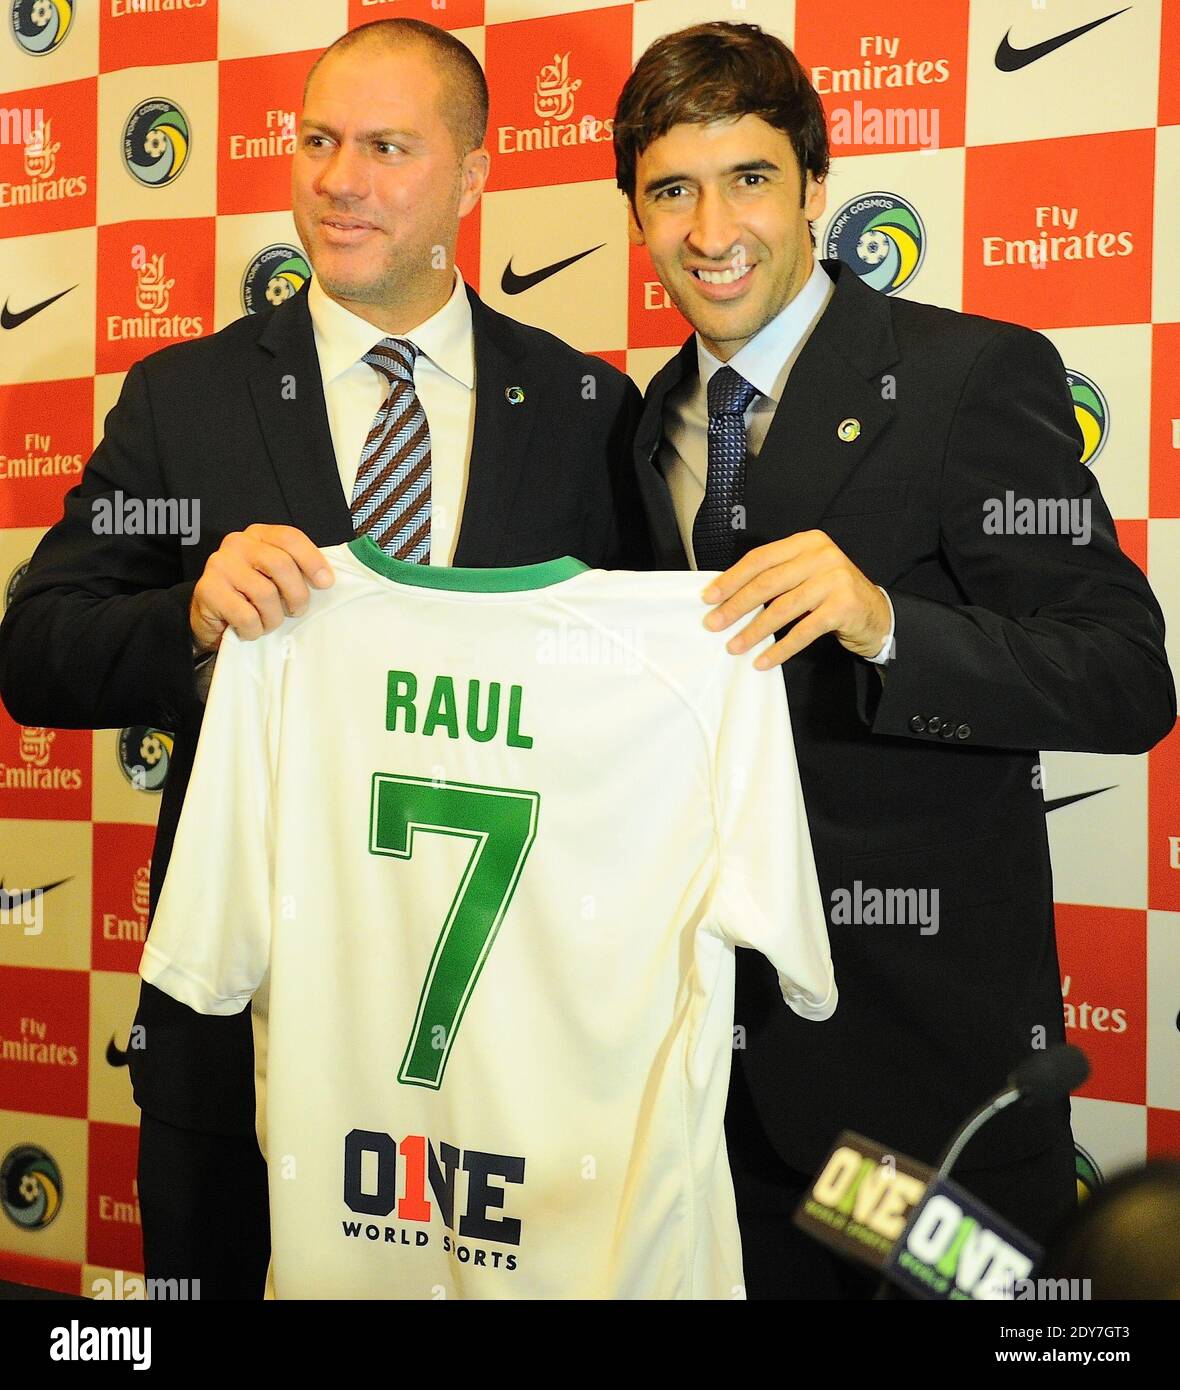 https://c8.alamy.com/comp/2DY7GT3/press-conference-to-introduce-new-york-cosmos-and-forward-real-madrid-legend-raul-gonzales-blanco-with-new-york-cosmos-head-coach-giovanni-savarese-at-the-four-seasons-hotel-new-york-ny-on-december-9-2014-famous-spanish-bullfighter-enrique-ponce-was-also-attending-the-press-conference-photo-by-morgan-dessallesabacapresscom-2DY7GT3.jpg